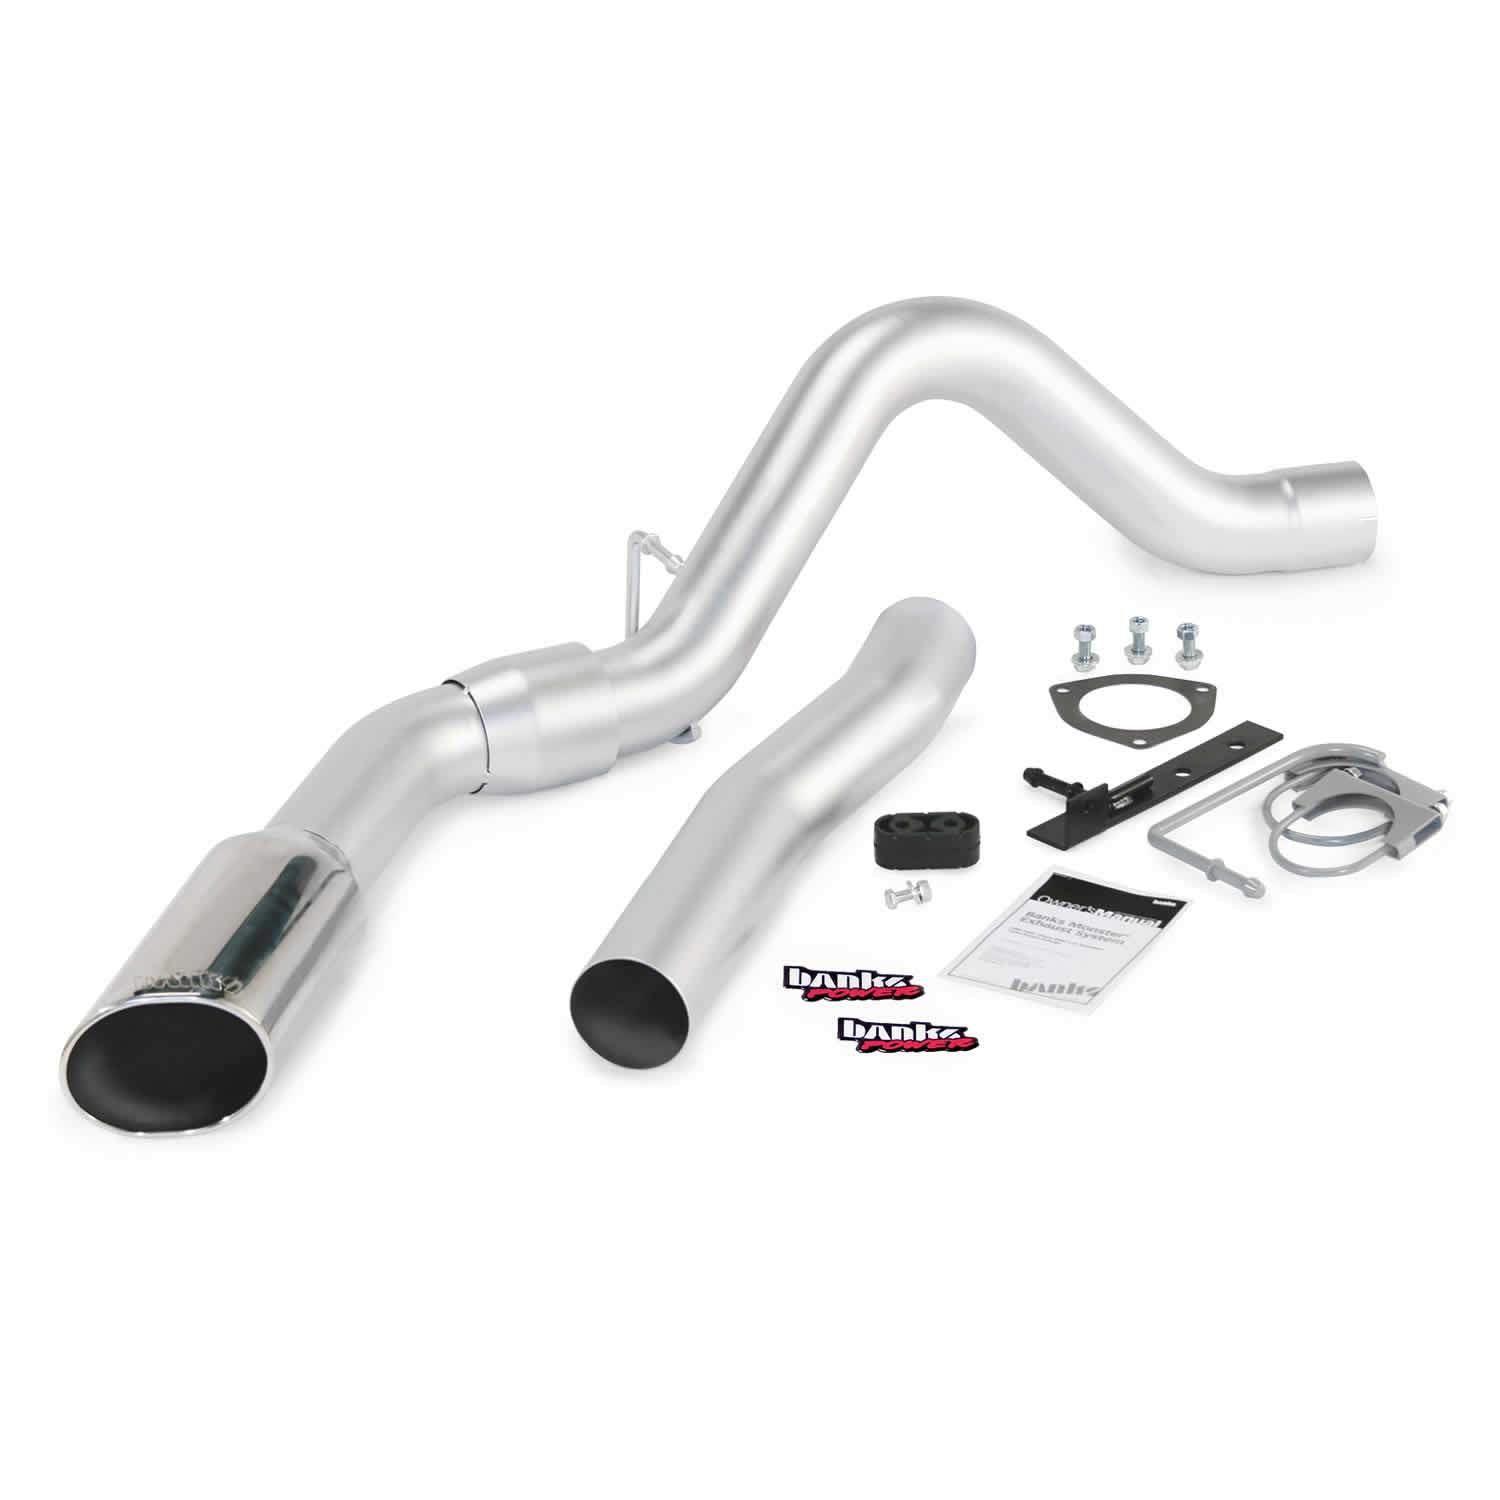 2011-2014 Duramax Exhaust System Kit (47786)-Exhaust System Kit-Banks Power-Dirty Diesel Customs